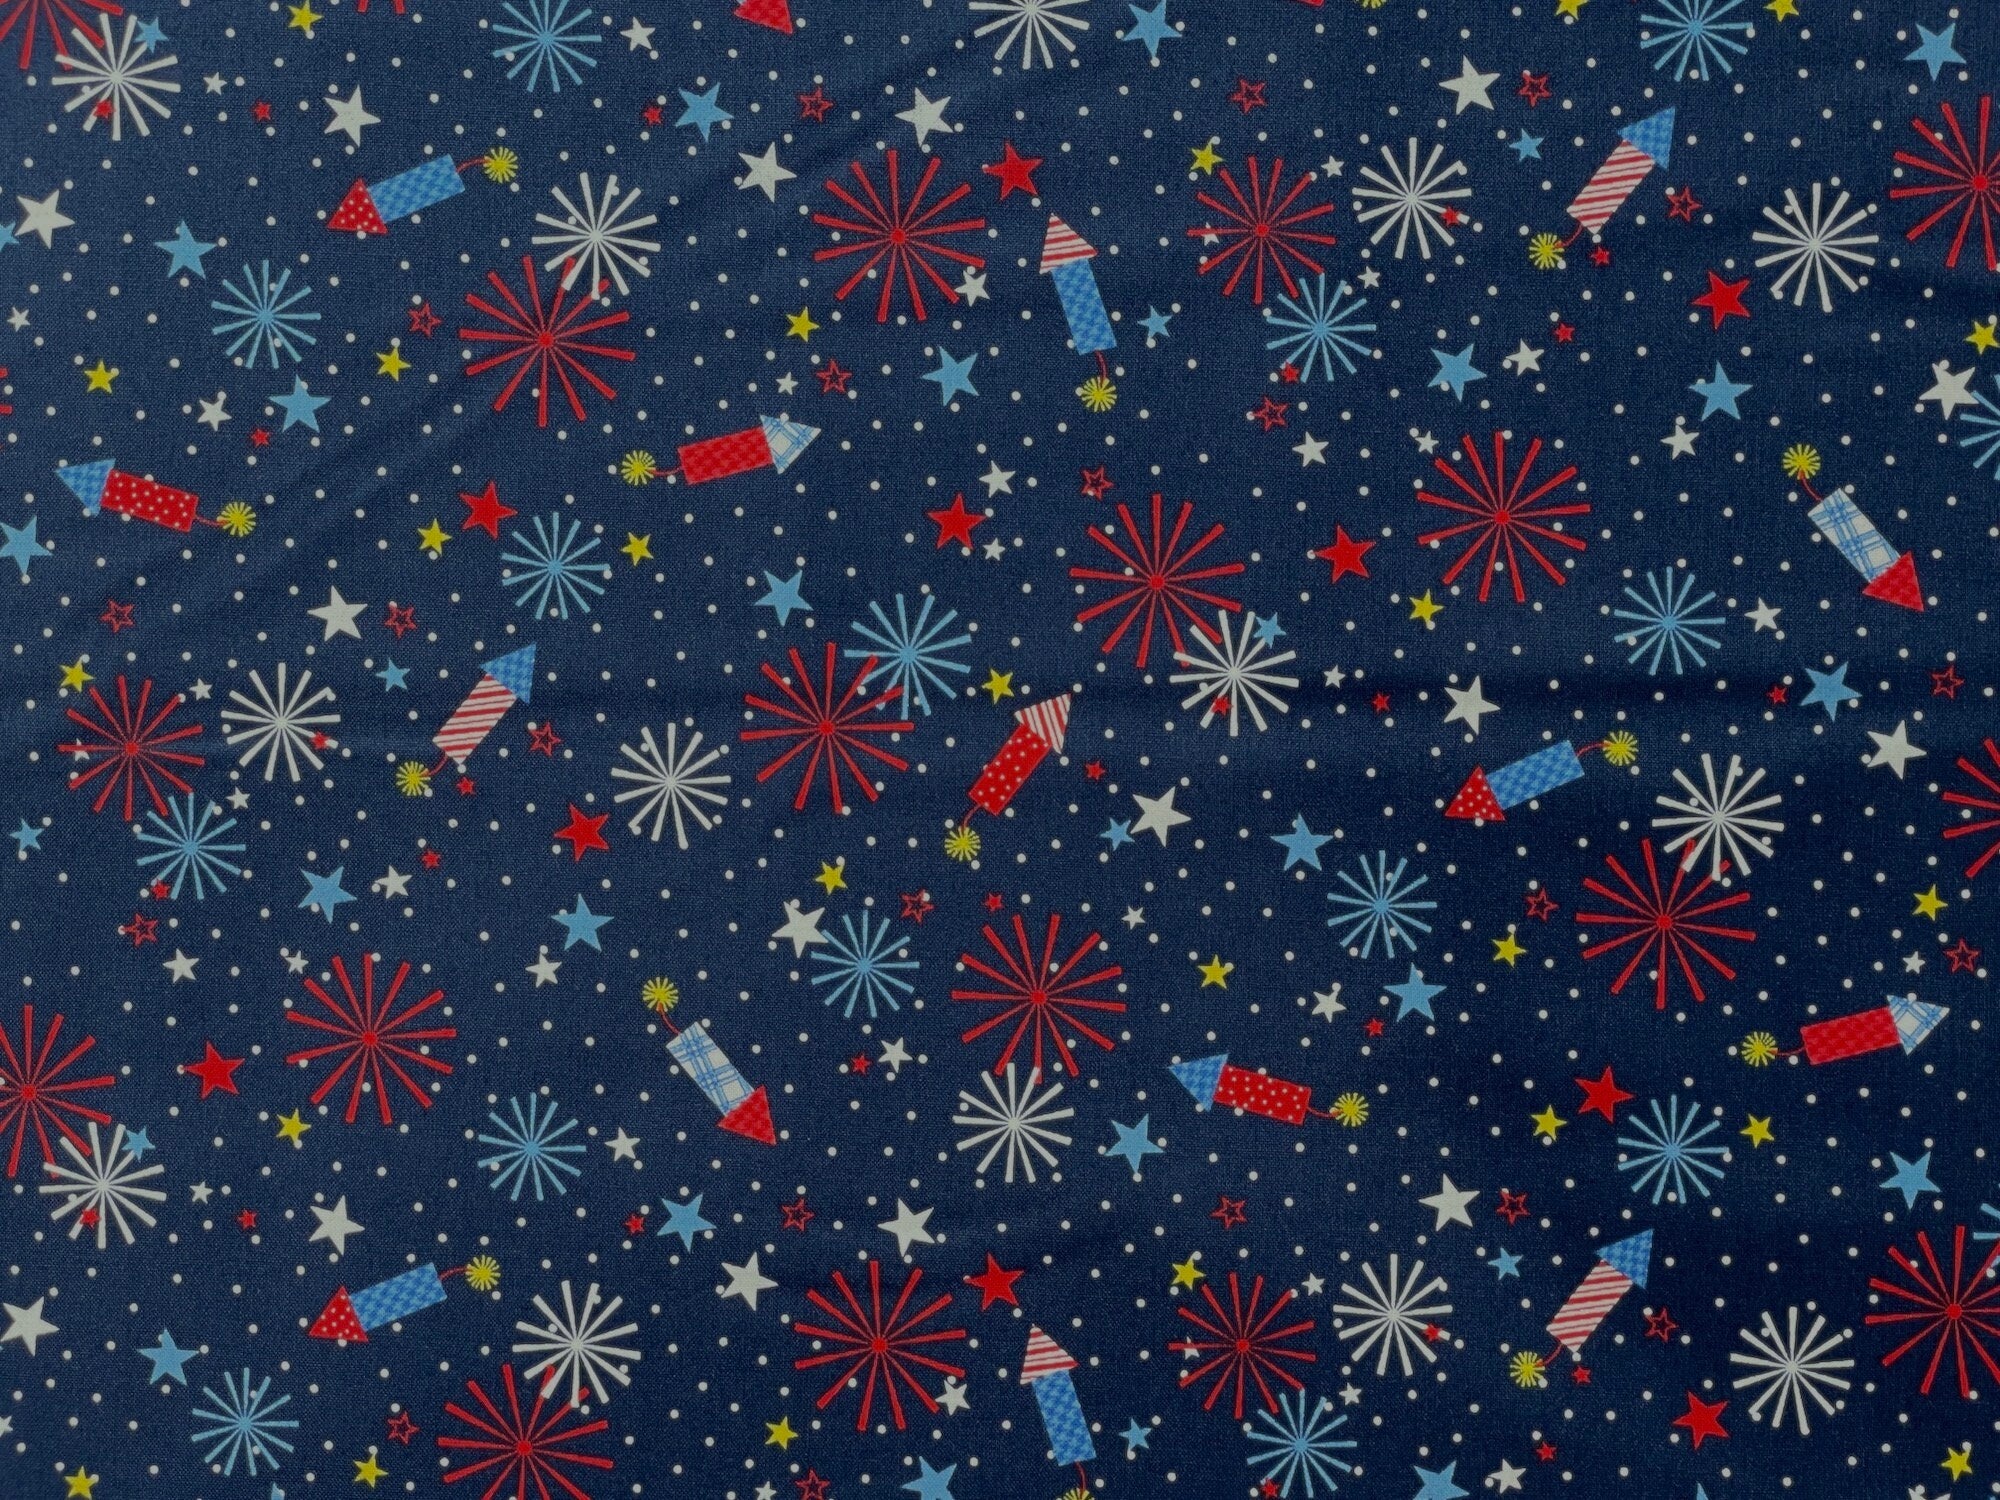 Here is a colorful Patriotic Fabric with Red White and Blue Fireworks on a Navy Blue background. You will also find yellow, red, blue and white stars and small white dots in the background. 